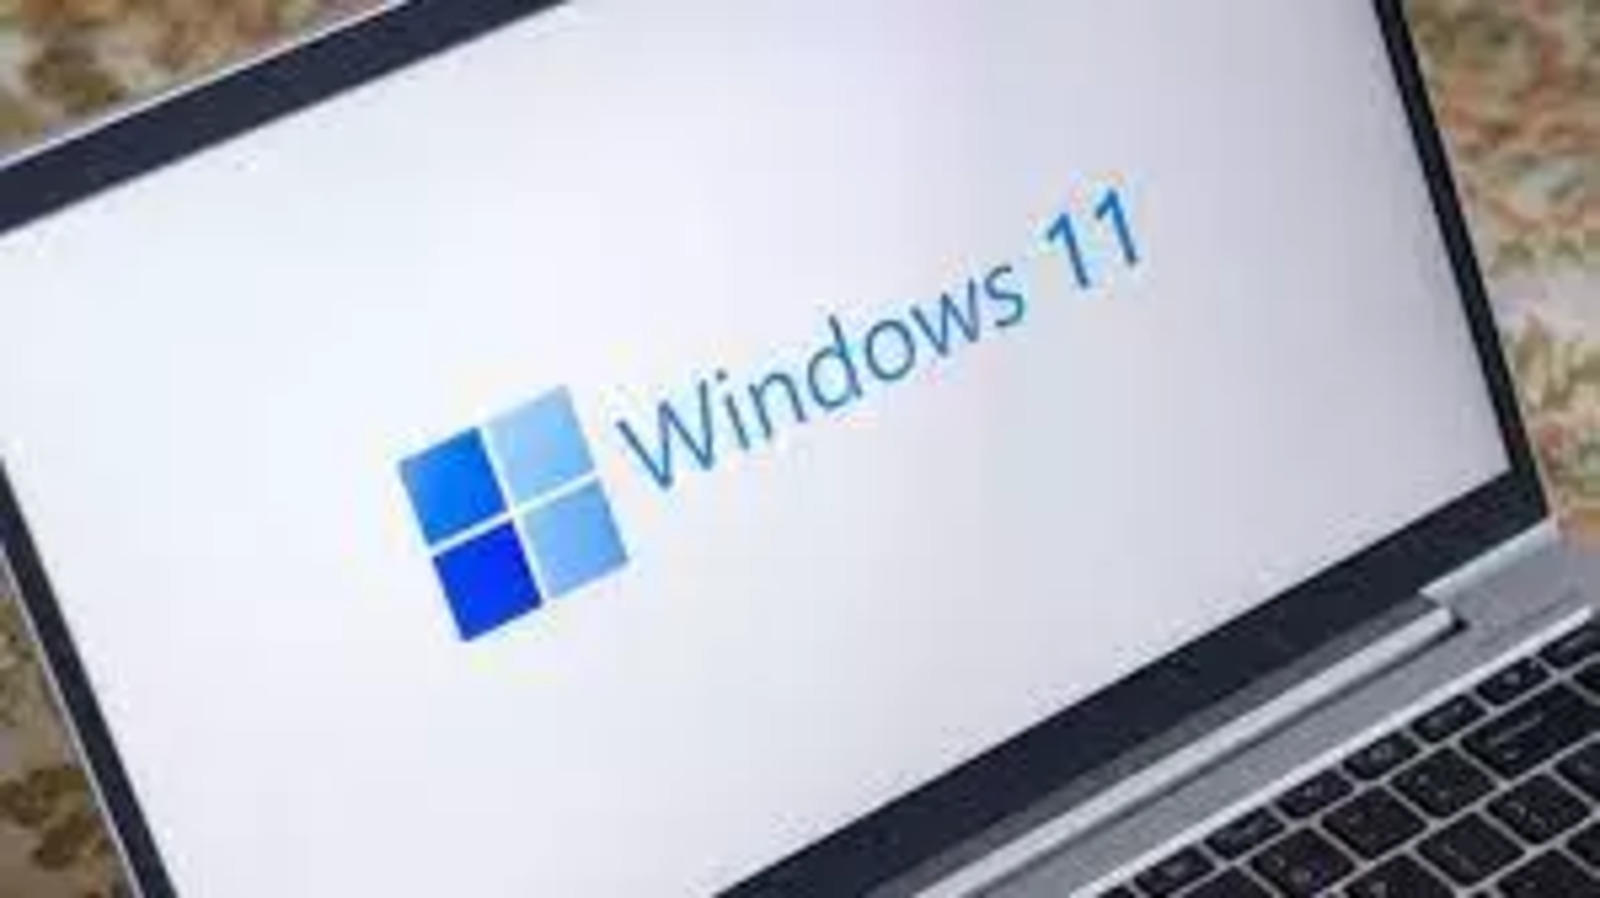 5 reasons to switch to Windows 11 (and 5 reasons not to)